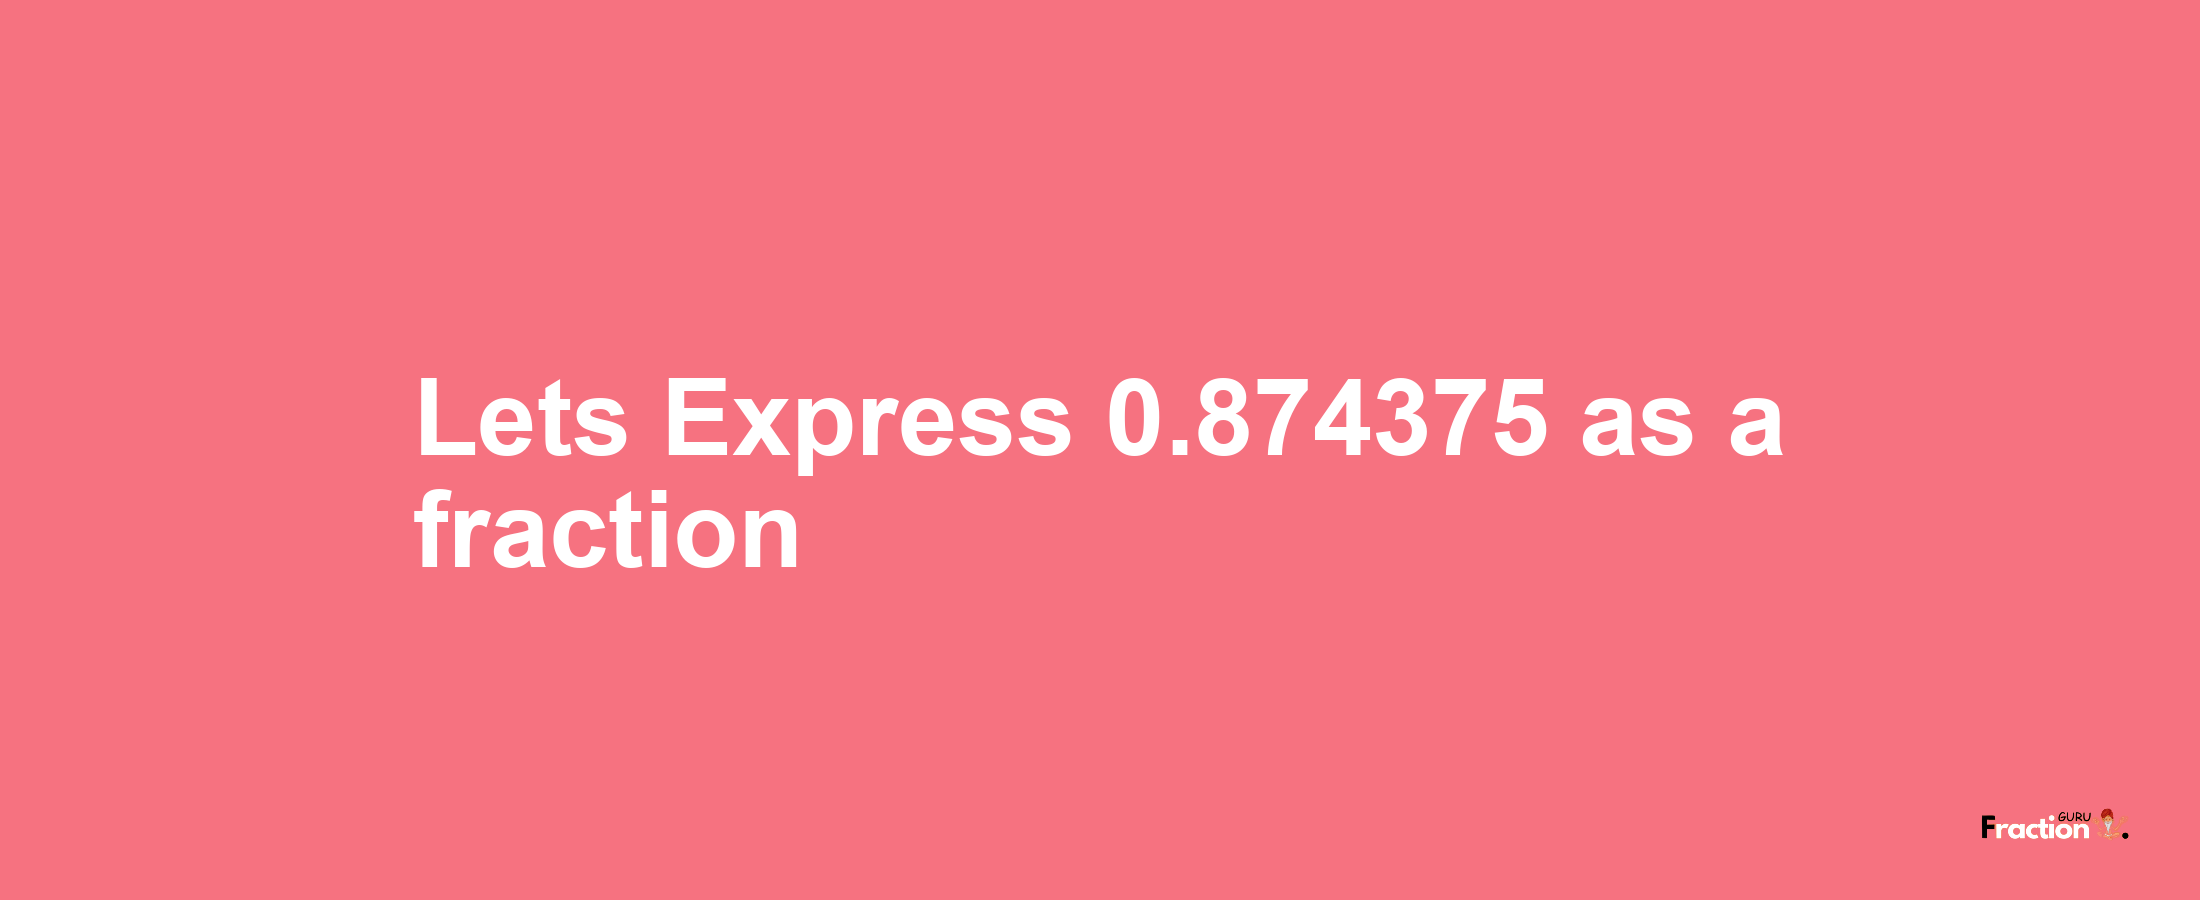 Lets Express 0.874375 as afraction